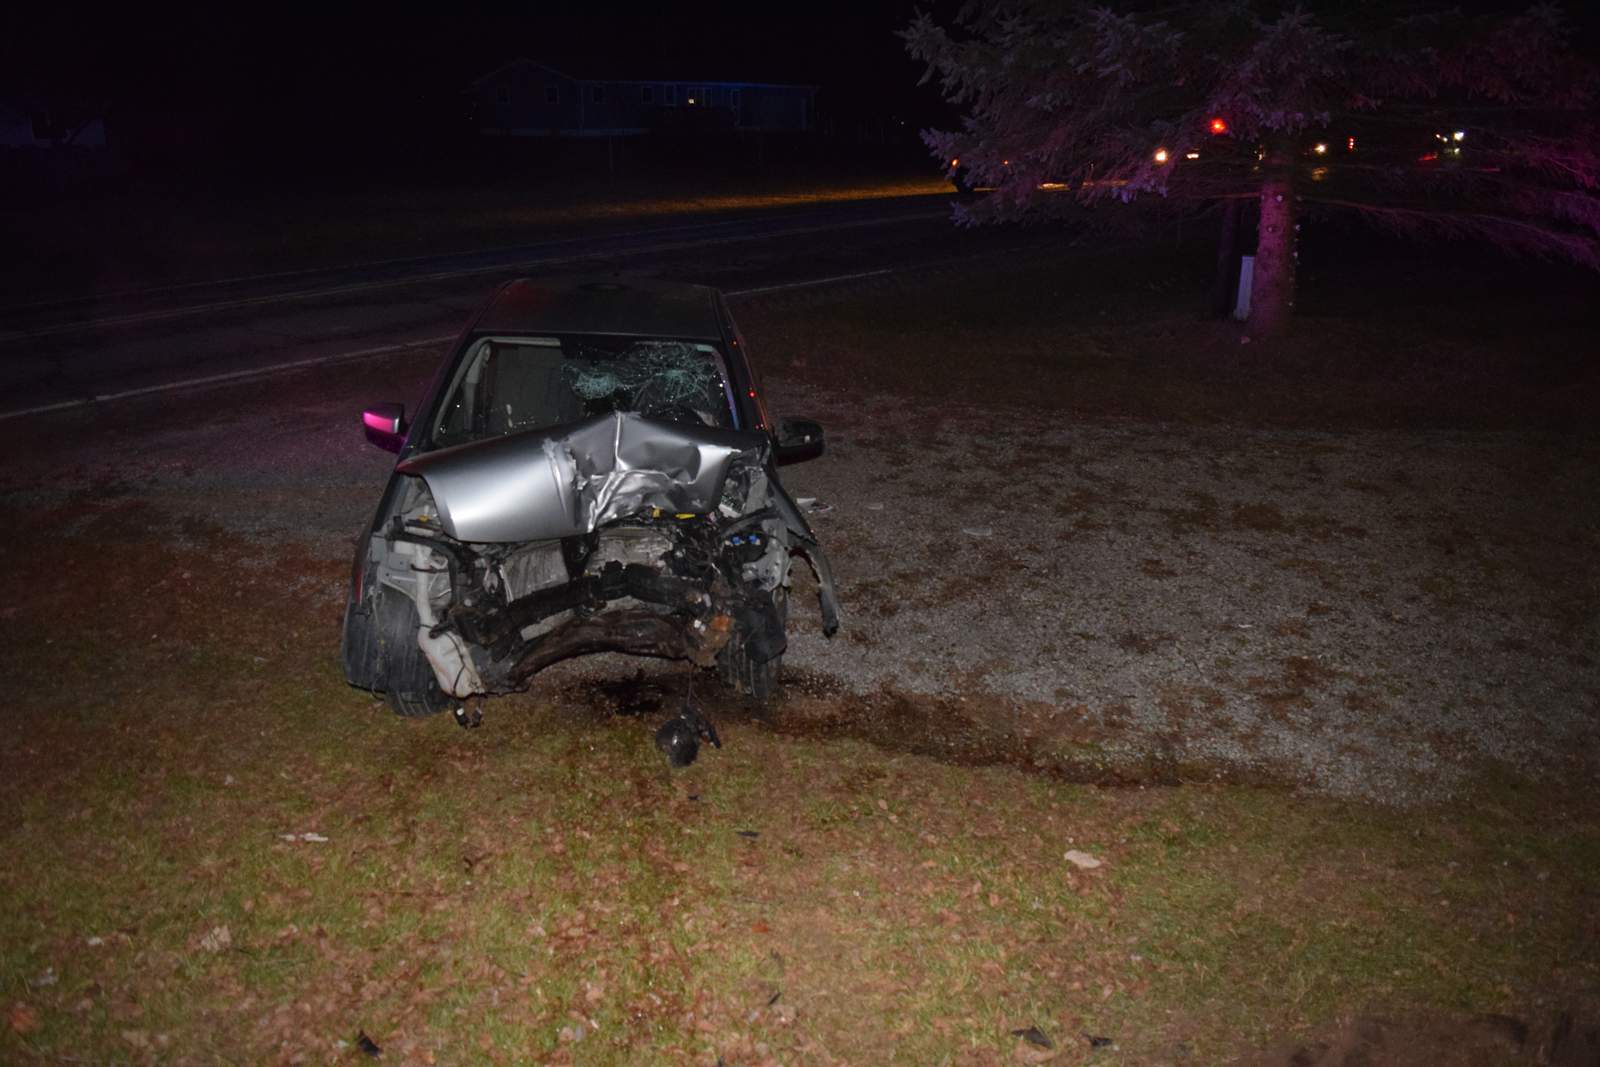 33-year-old man killed in single-car crash in Lapeer County